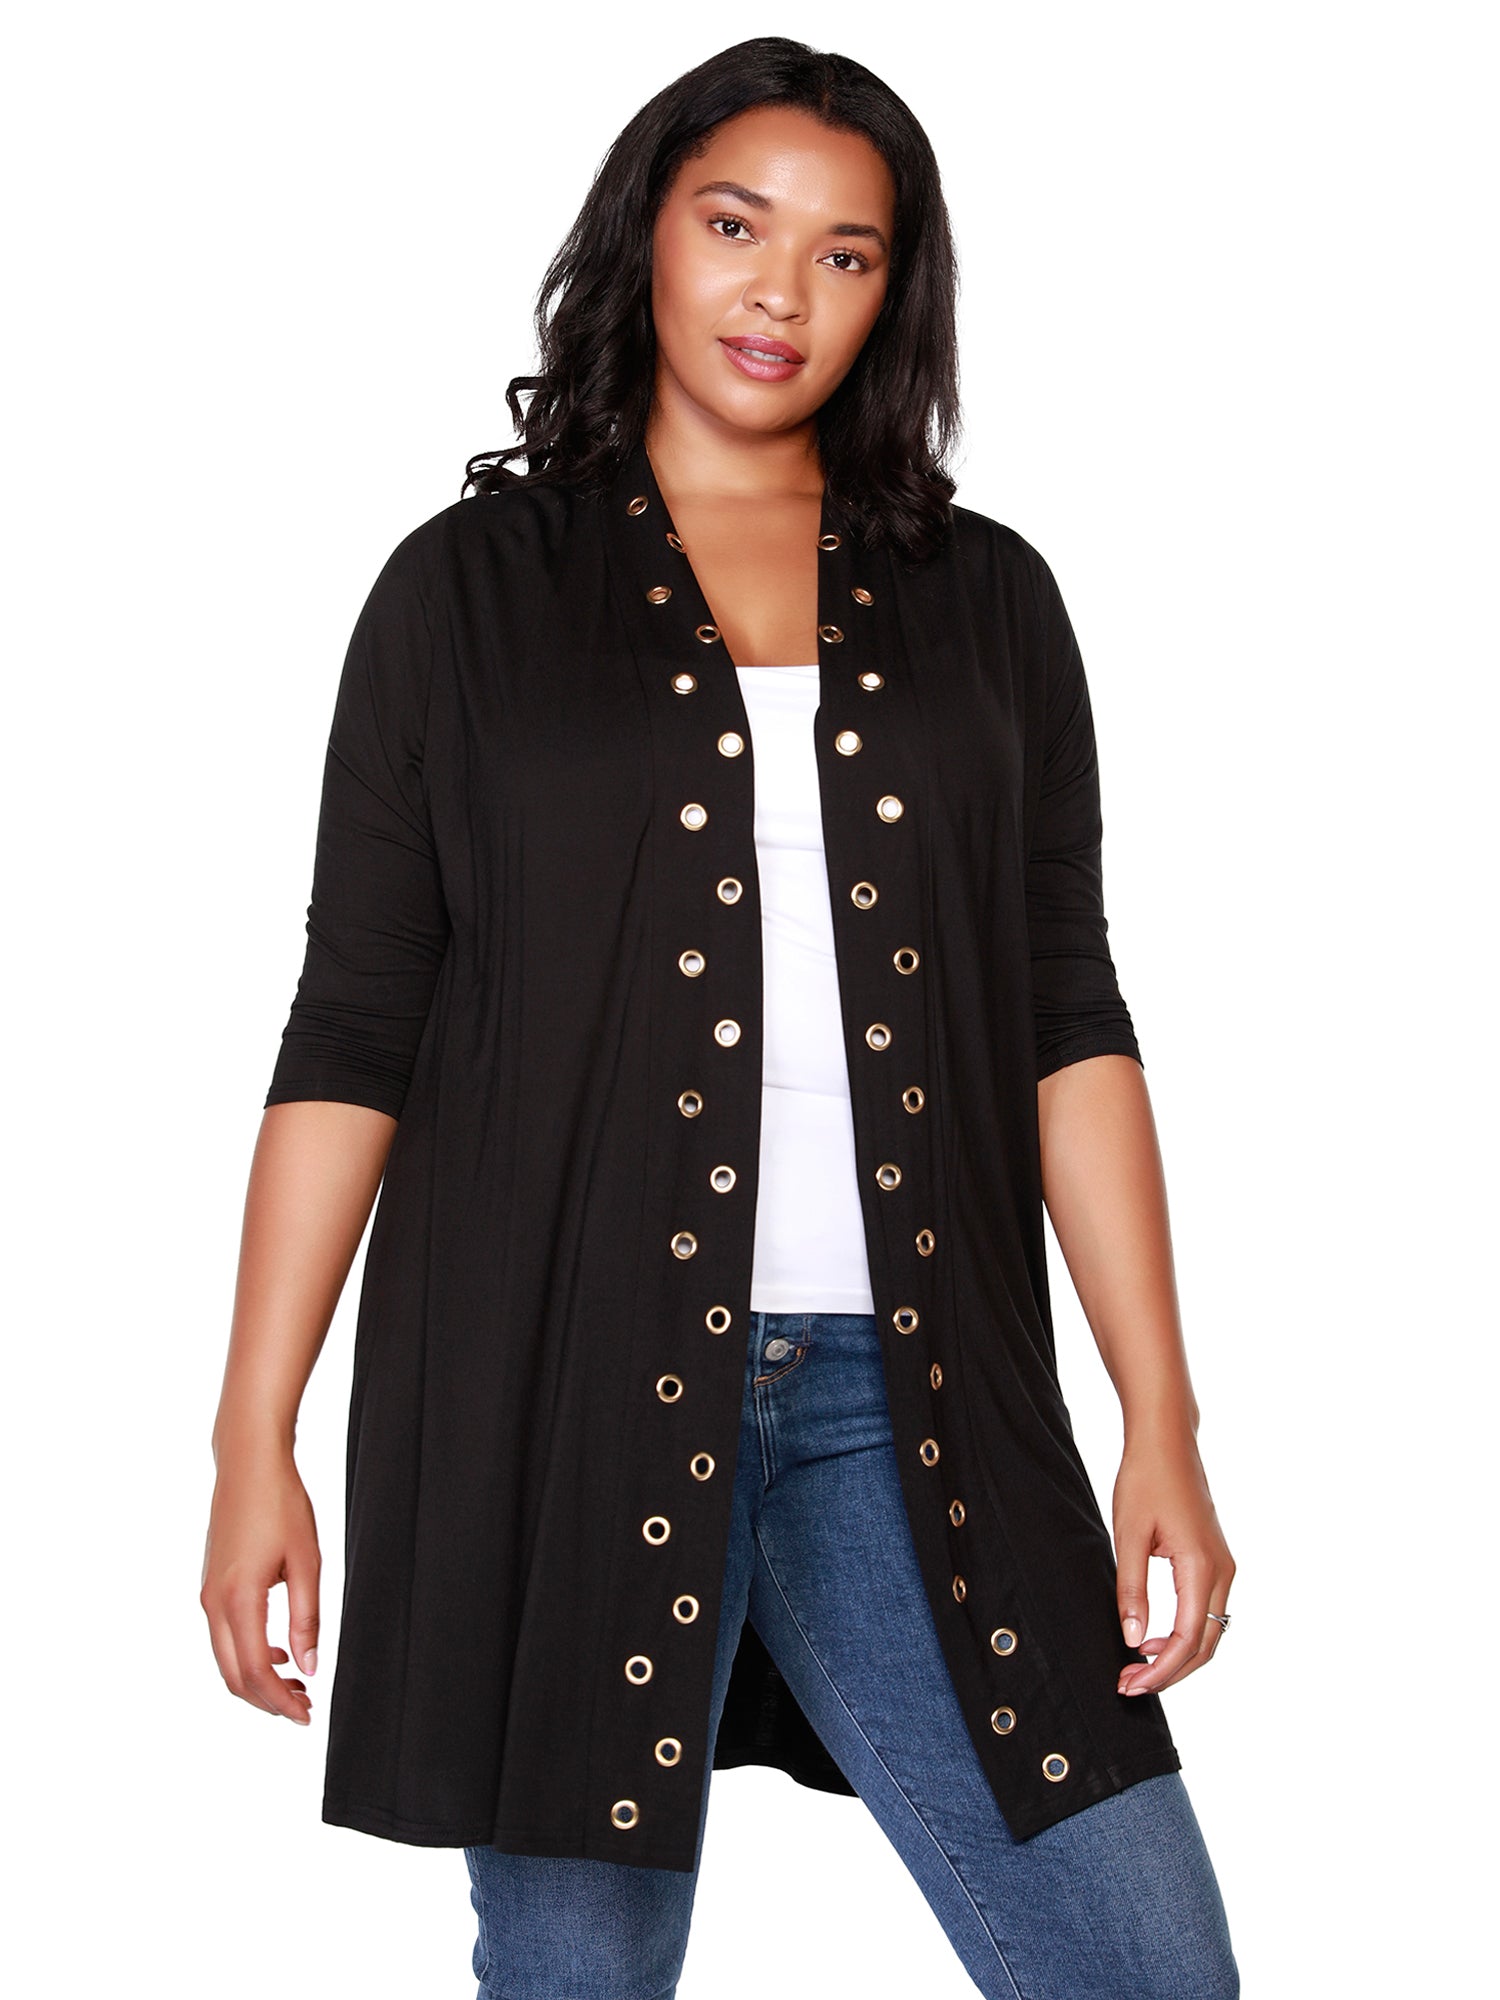 Women's 3/4 Sleeve Mid-Thigh Jersey Cardigan with Grommet Trim | Curvy